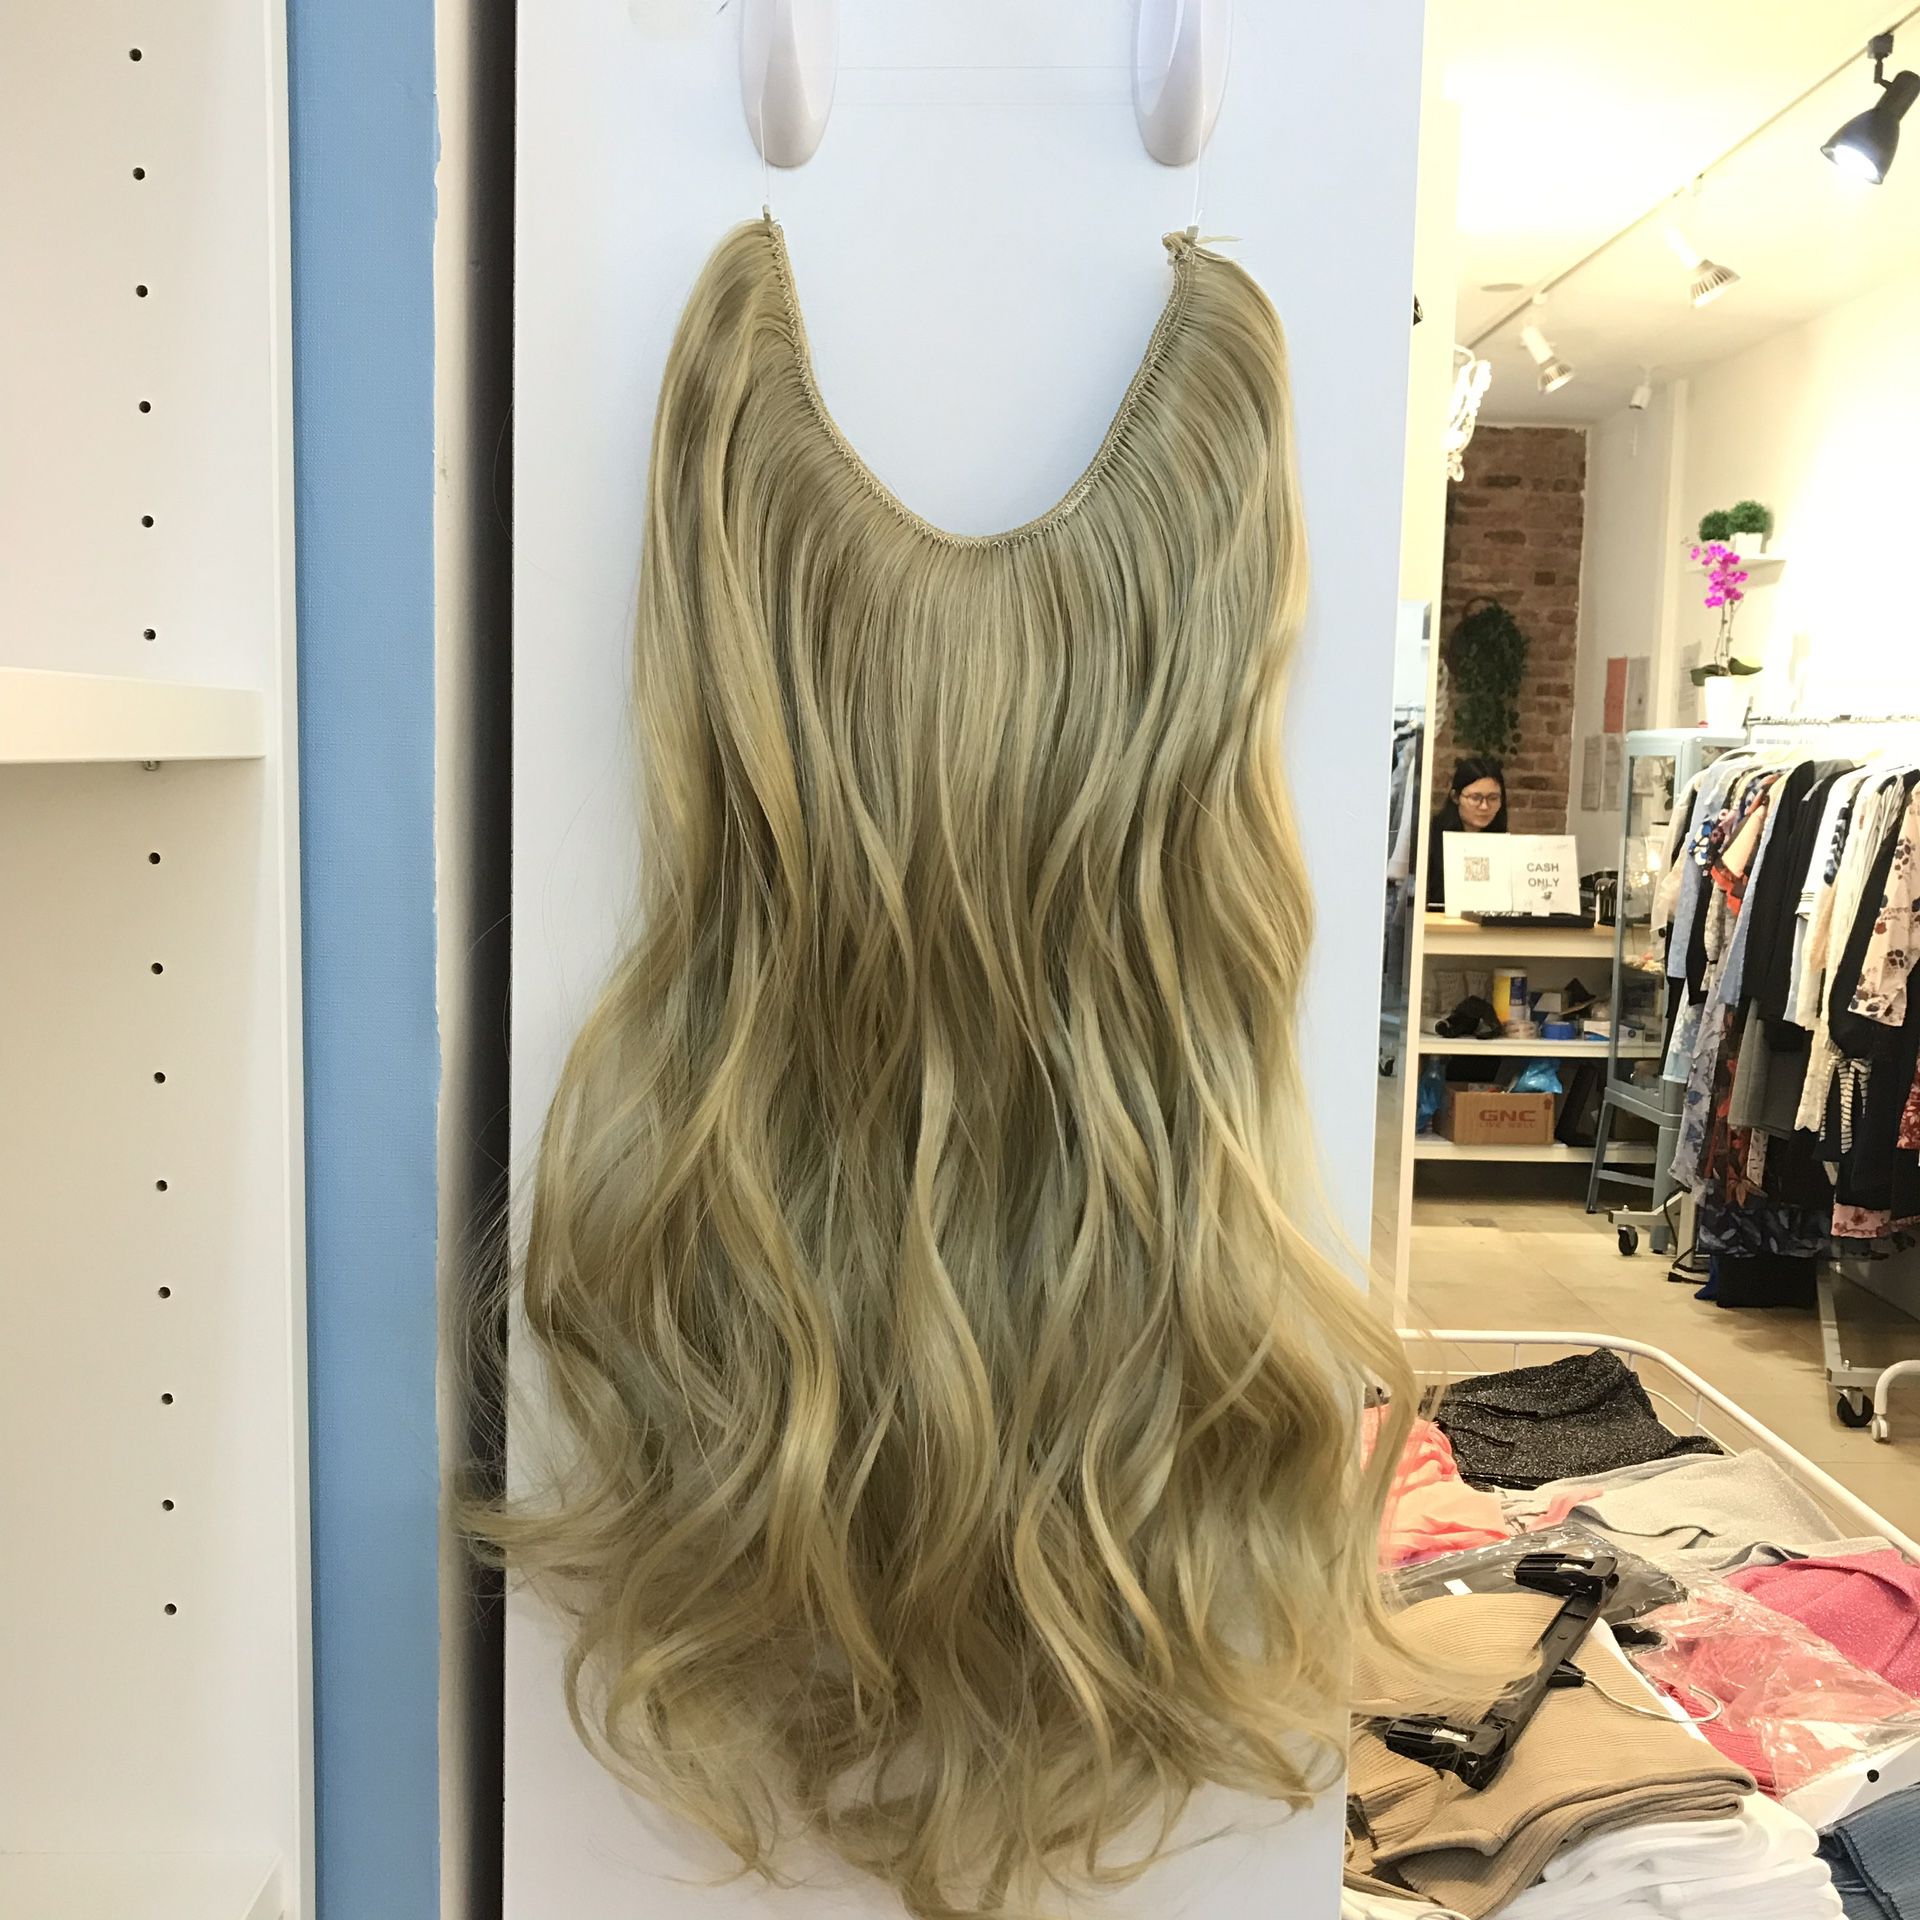 24” Fish line band halo hair extension